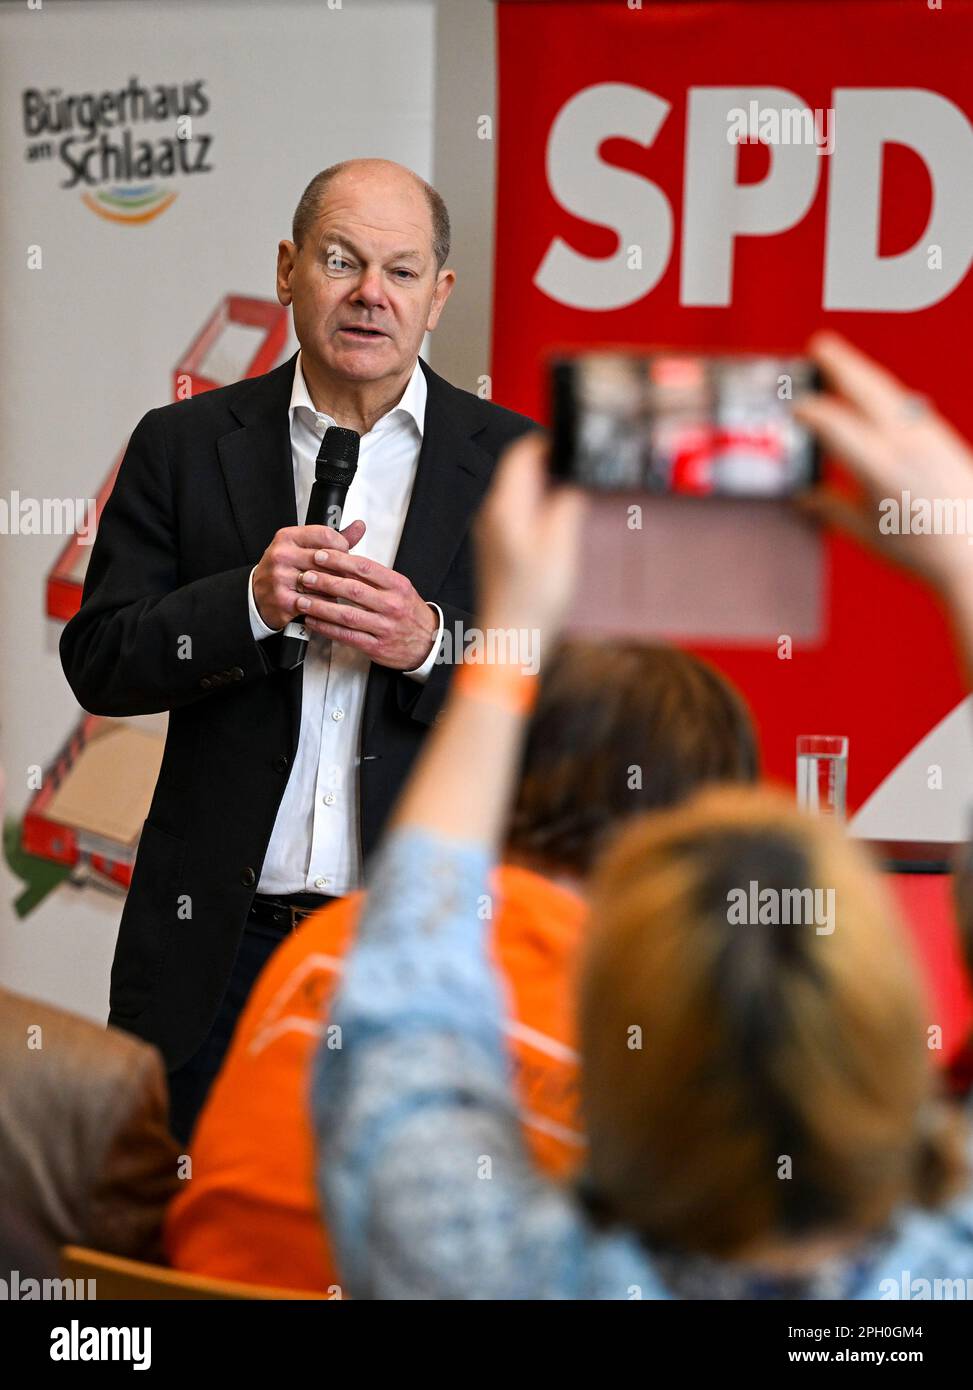 PRODUCTION - 25 March 2023, Brandenburg, Potsdam: Chancellor Olaf Scholz (SPD) takes part in a constituency discussion as a member of parliament at the Bürgerhaus am Schlaatz. Photo: Jens Kalaene/dpa Stock Photo